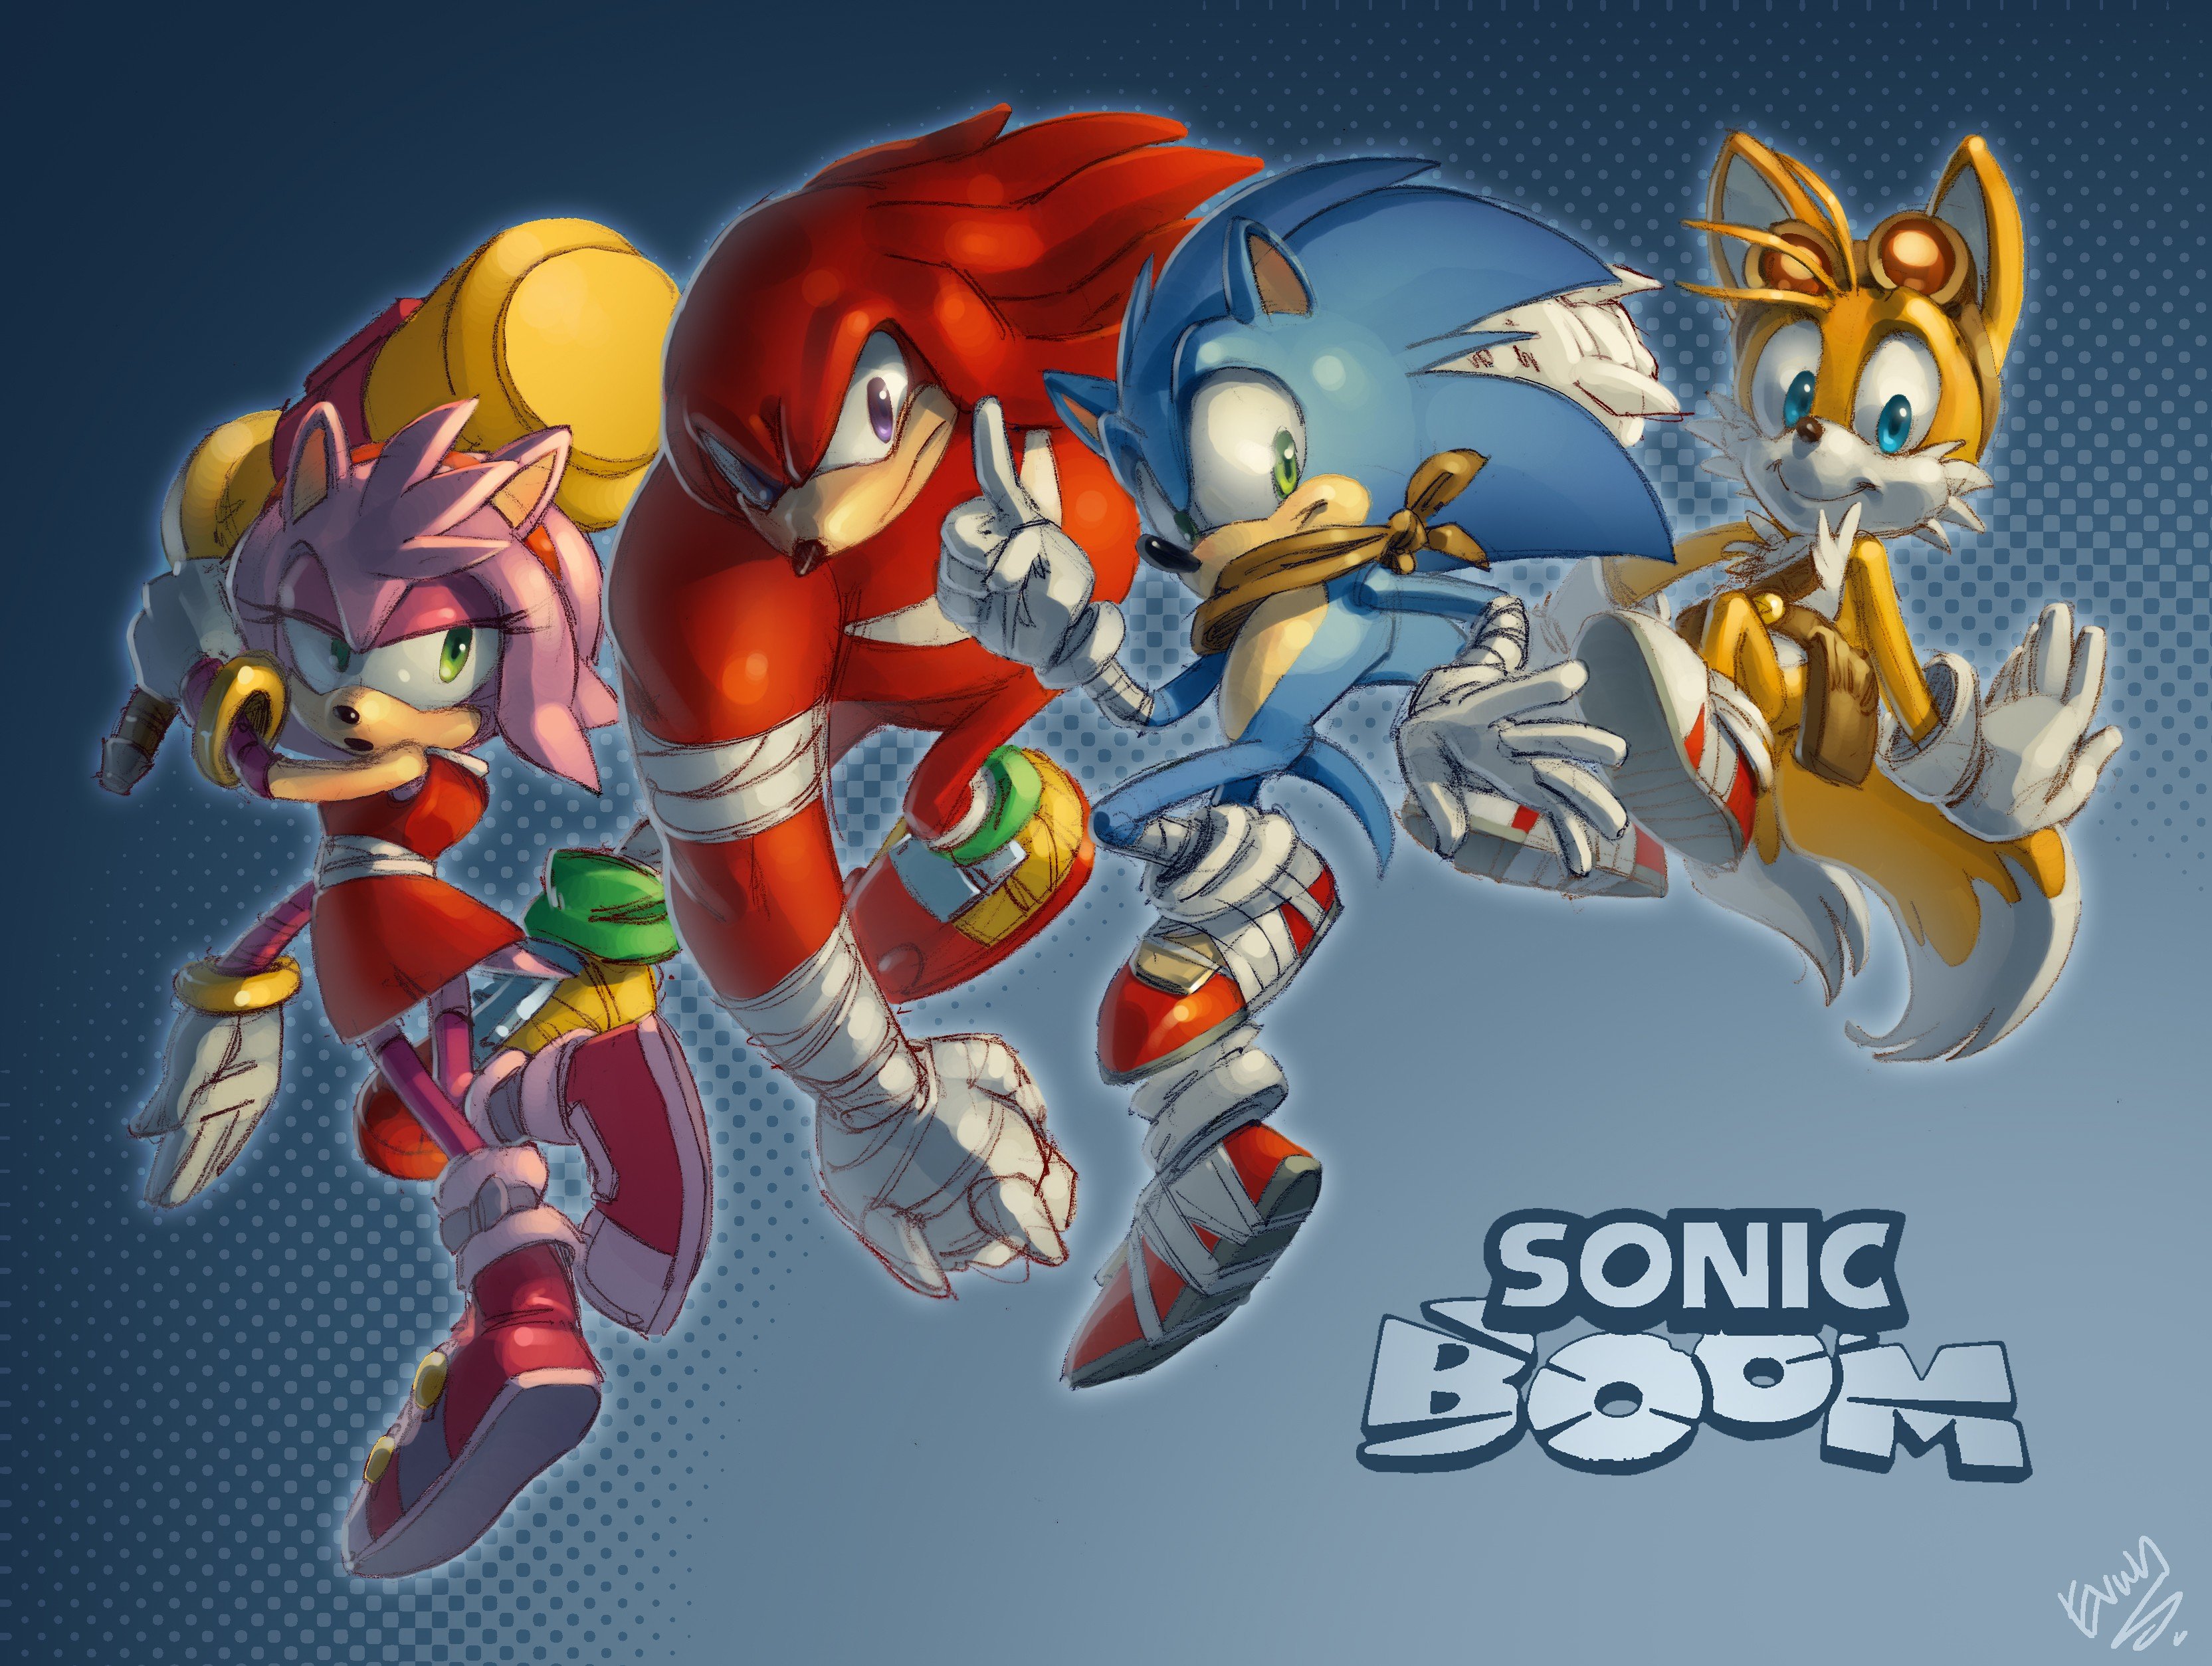 Tails (character), Sonic Boom, Sonic, Sonic the Hedgehog